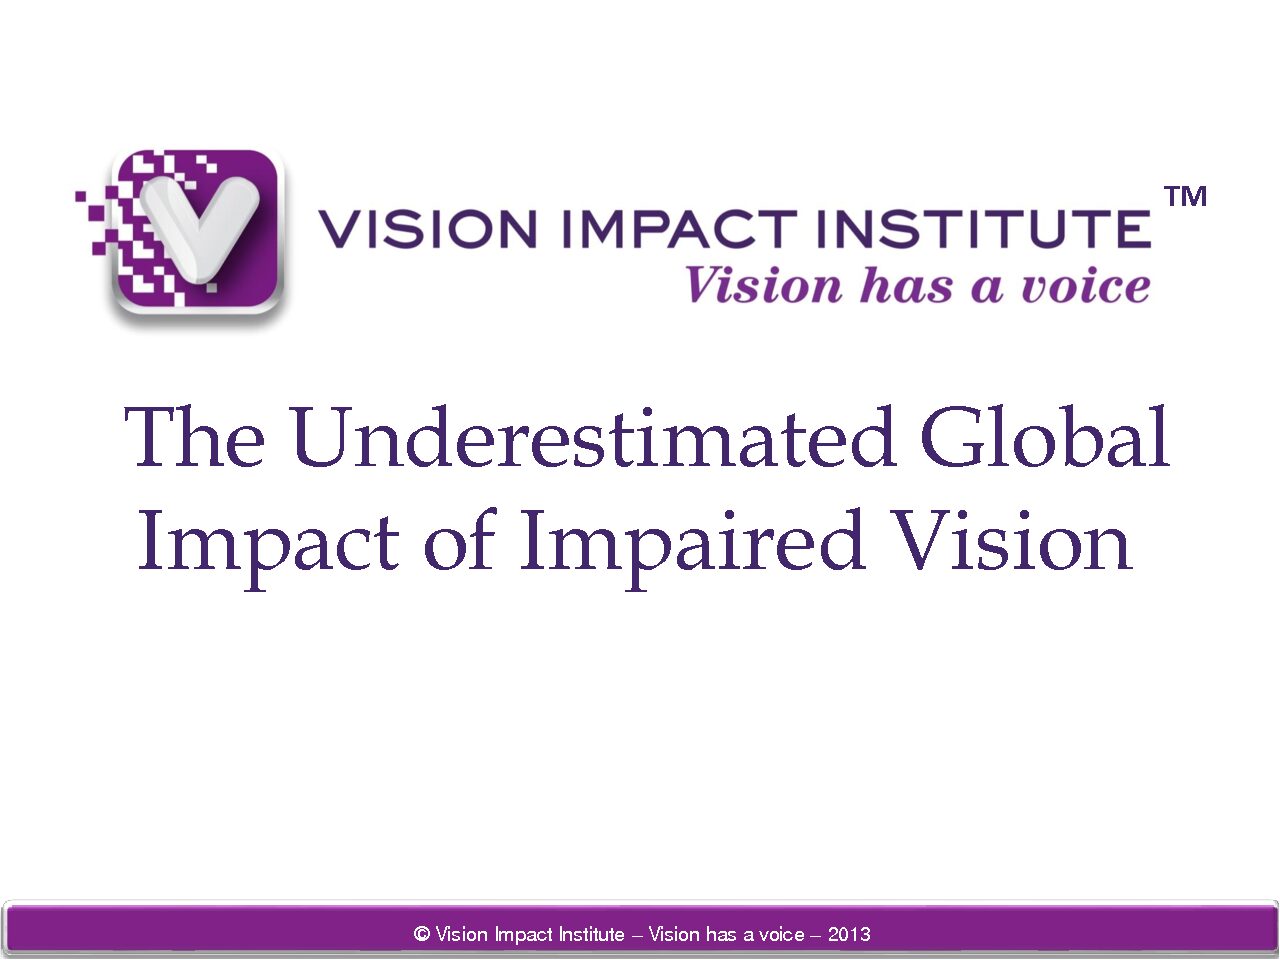 The Underestimated Global Impact of Impaired Vision